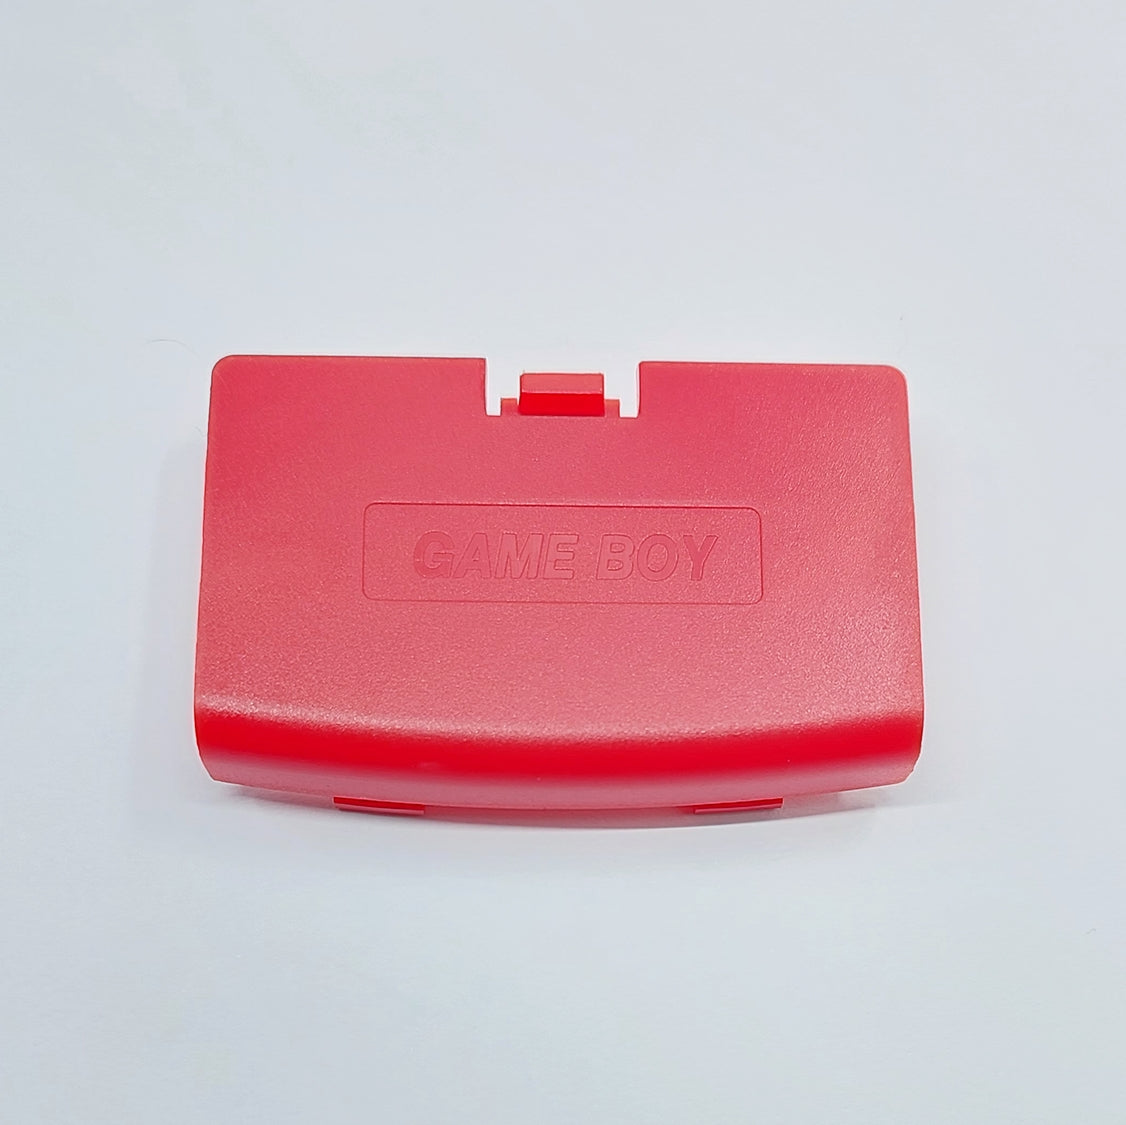 Battery Door Replacement For Nintendo Game Boy Advance GBA